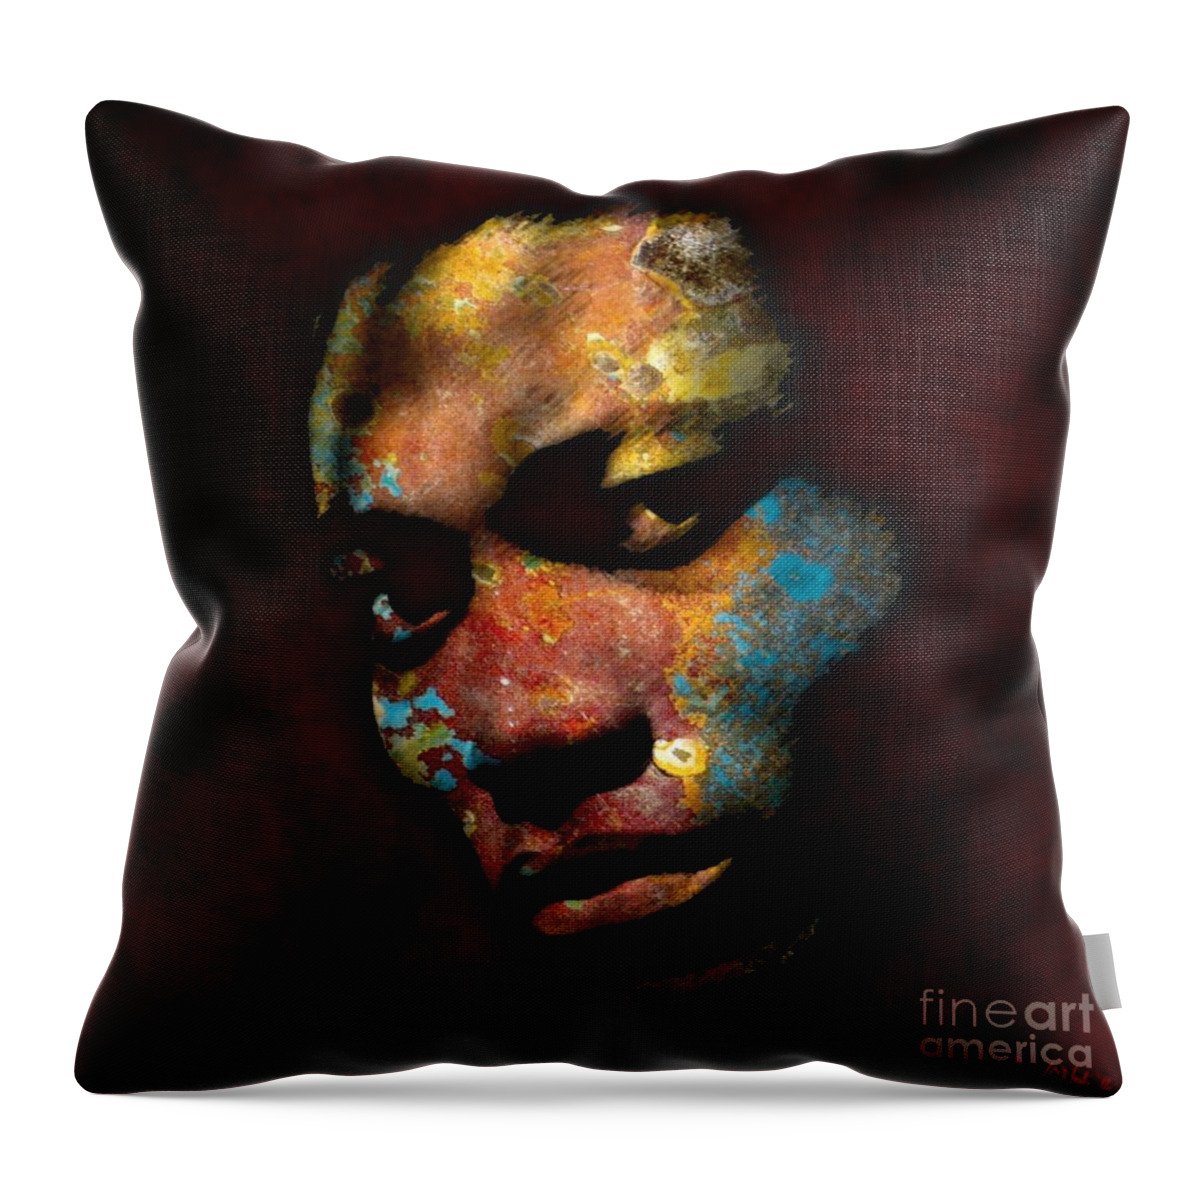 Faces Throw Pillow featuring the digital art Benjamin Clementine by Walter Neal